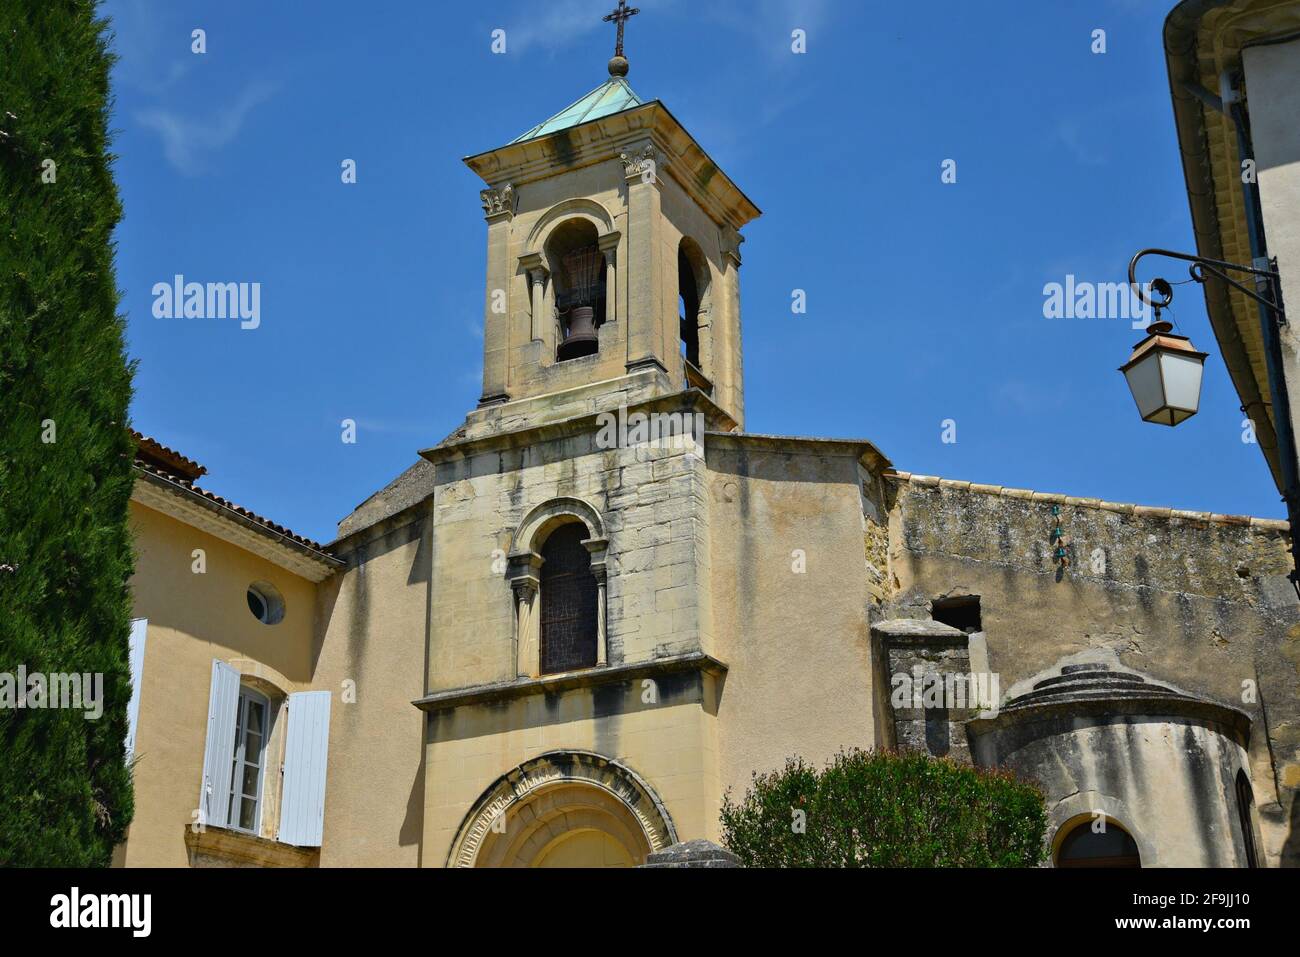 Facade and belfry of the Romanesque style church Saint-André-et-Saint-Trophime in the picturesque village of Lourmarin in Vaucluse, Provence France. Stock Photo